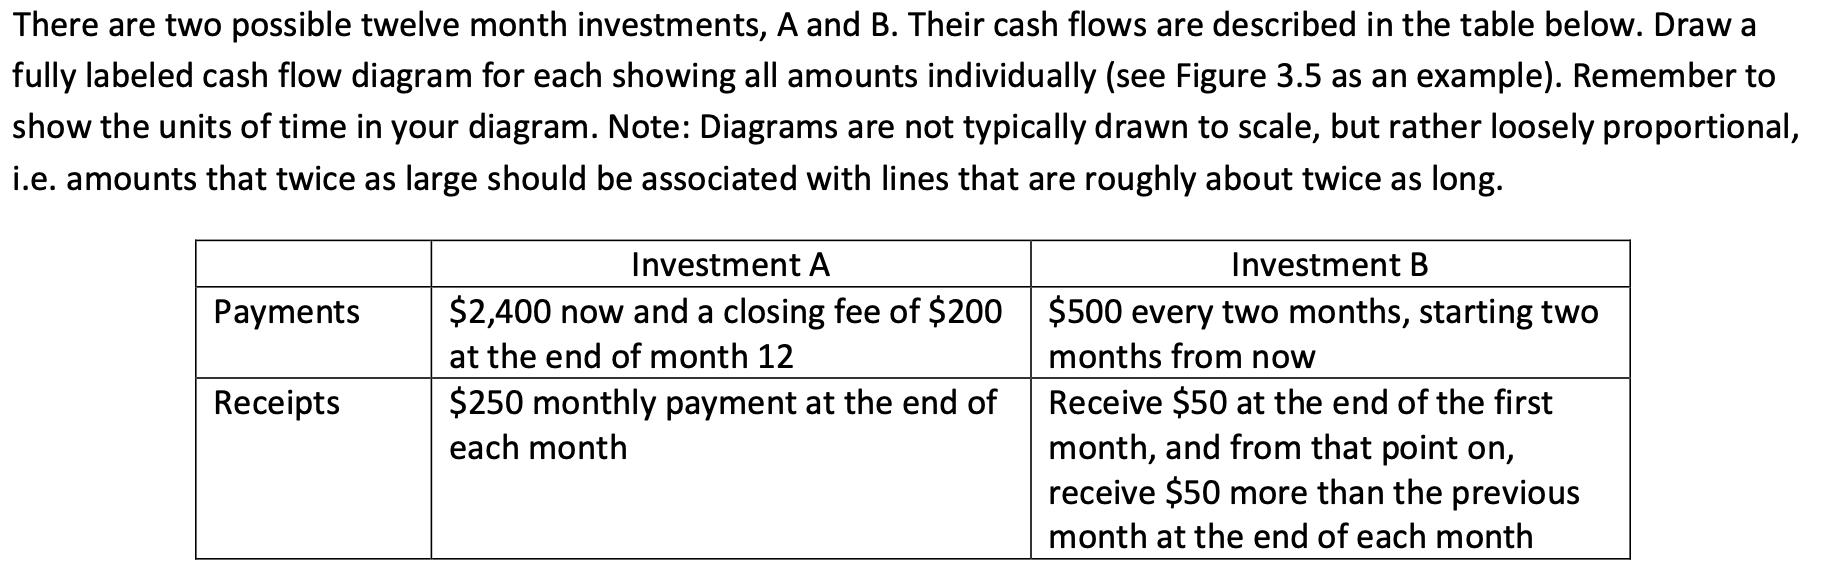 There are two possible twelve month investments, A and B. Their cash flows are described in the table below. Draw a fully lab